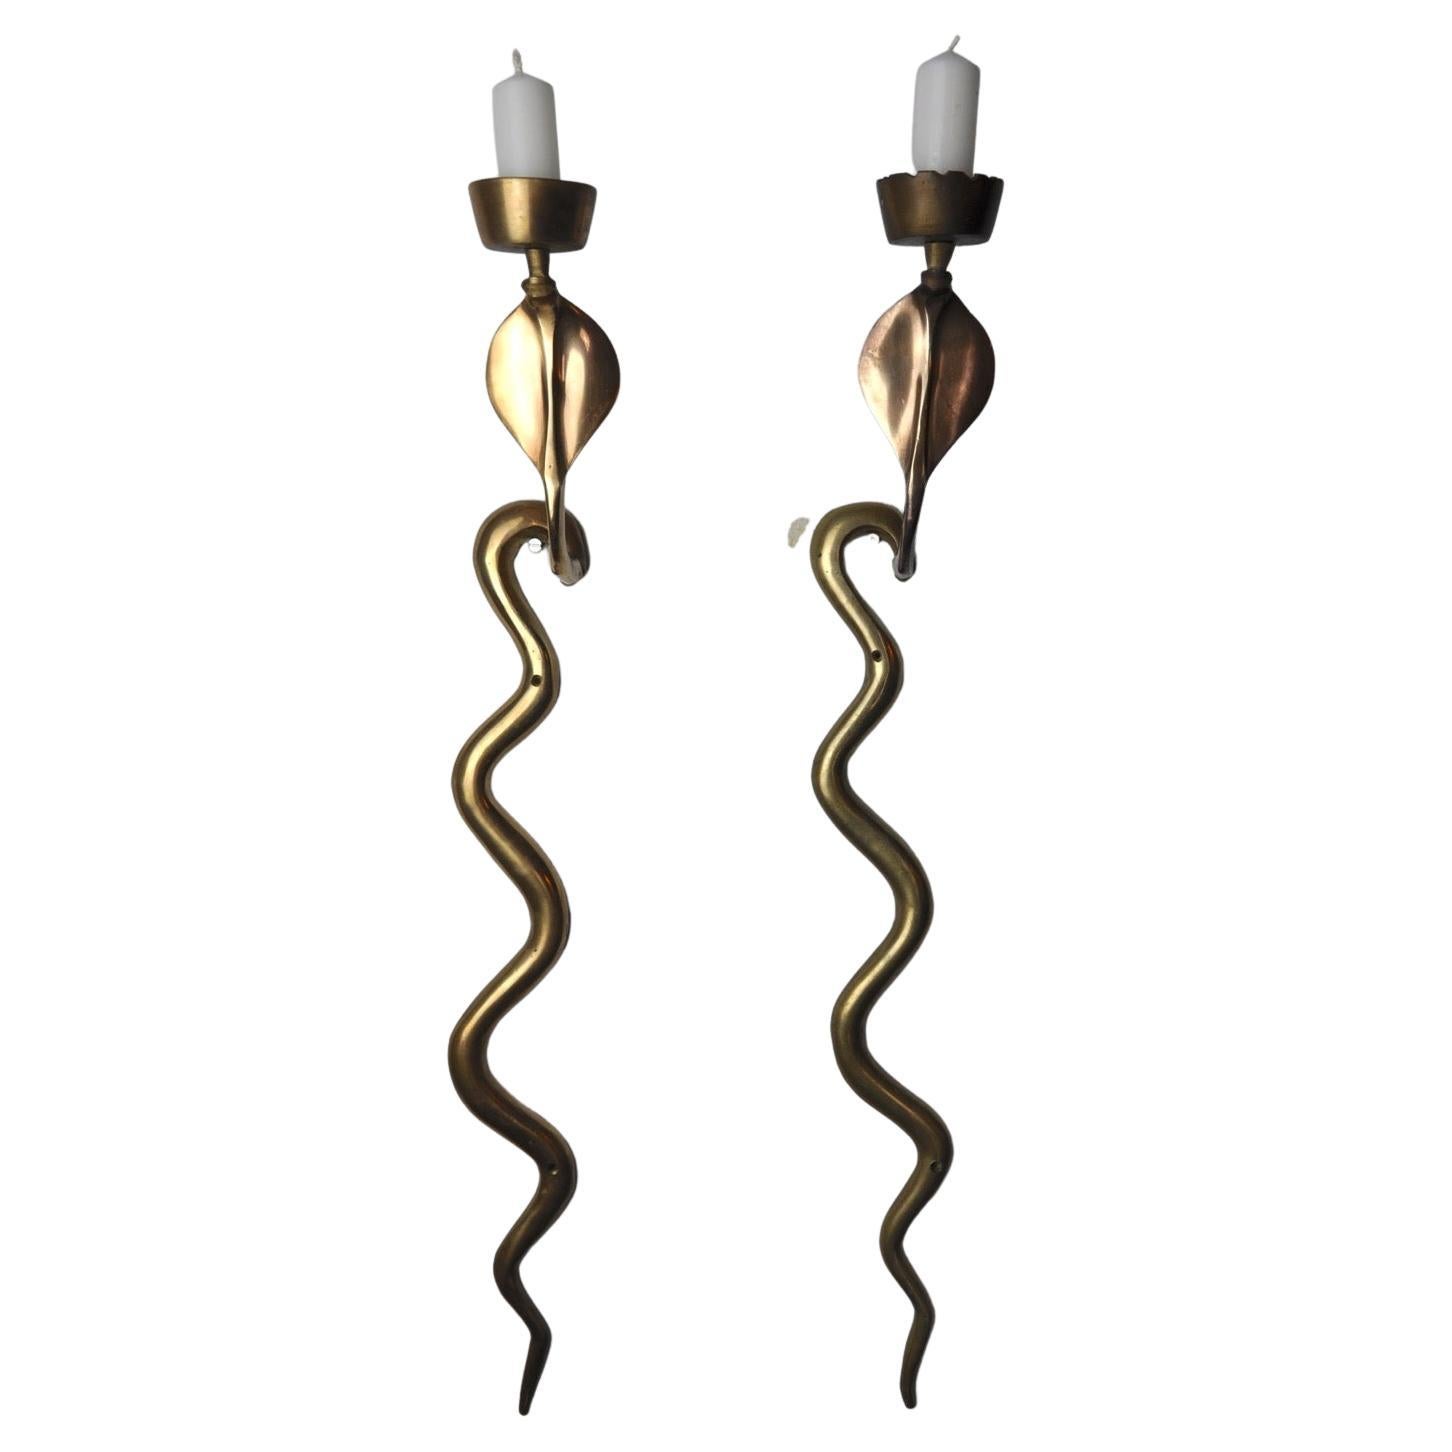 Pair of "Serpent" Candlesticks by Italo Valenti, 1970